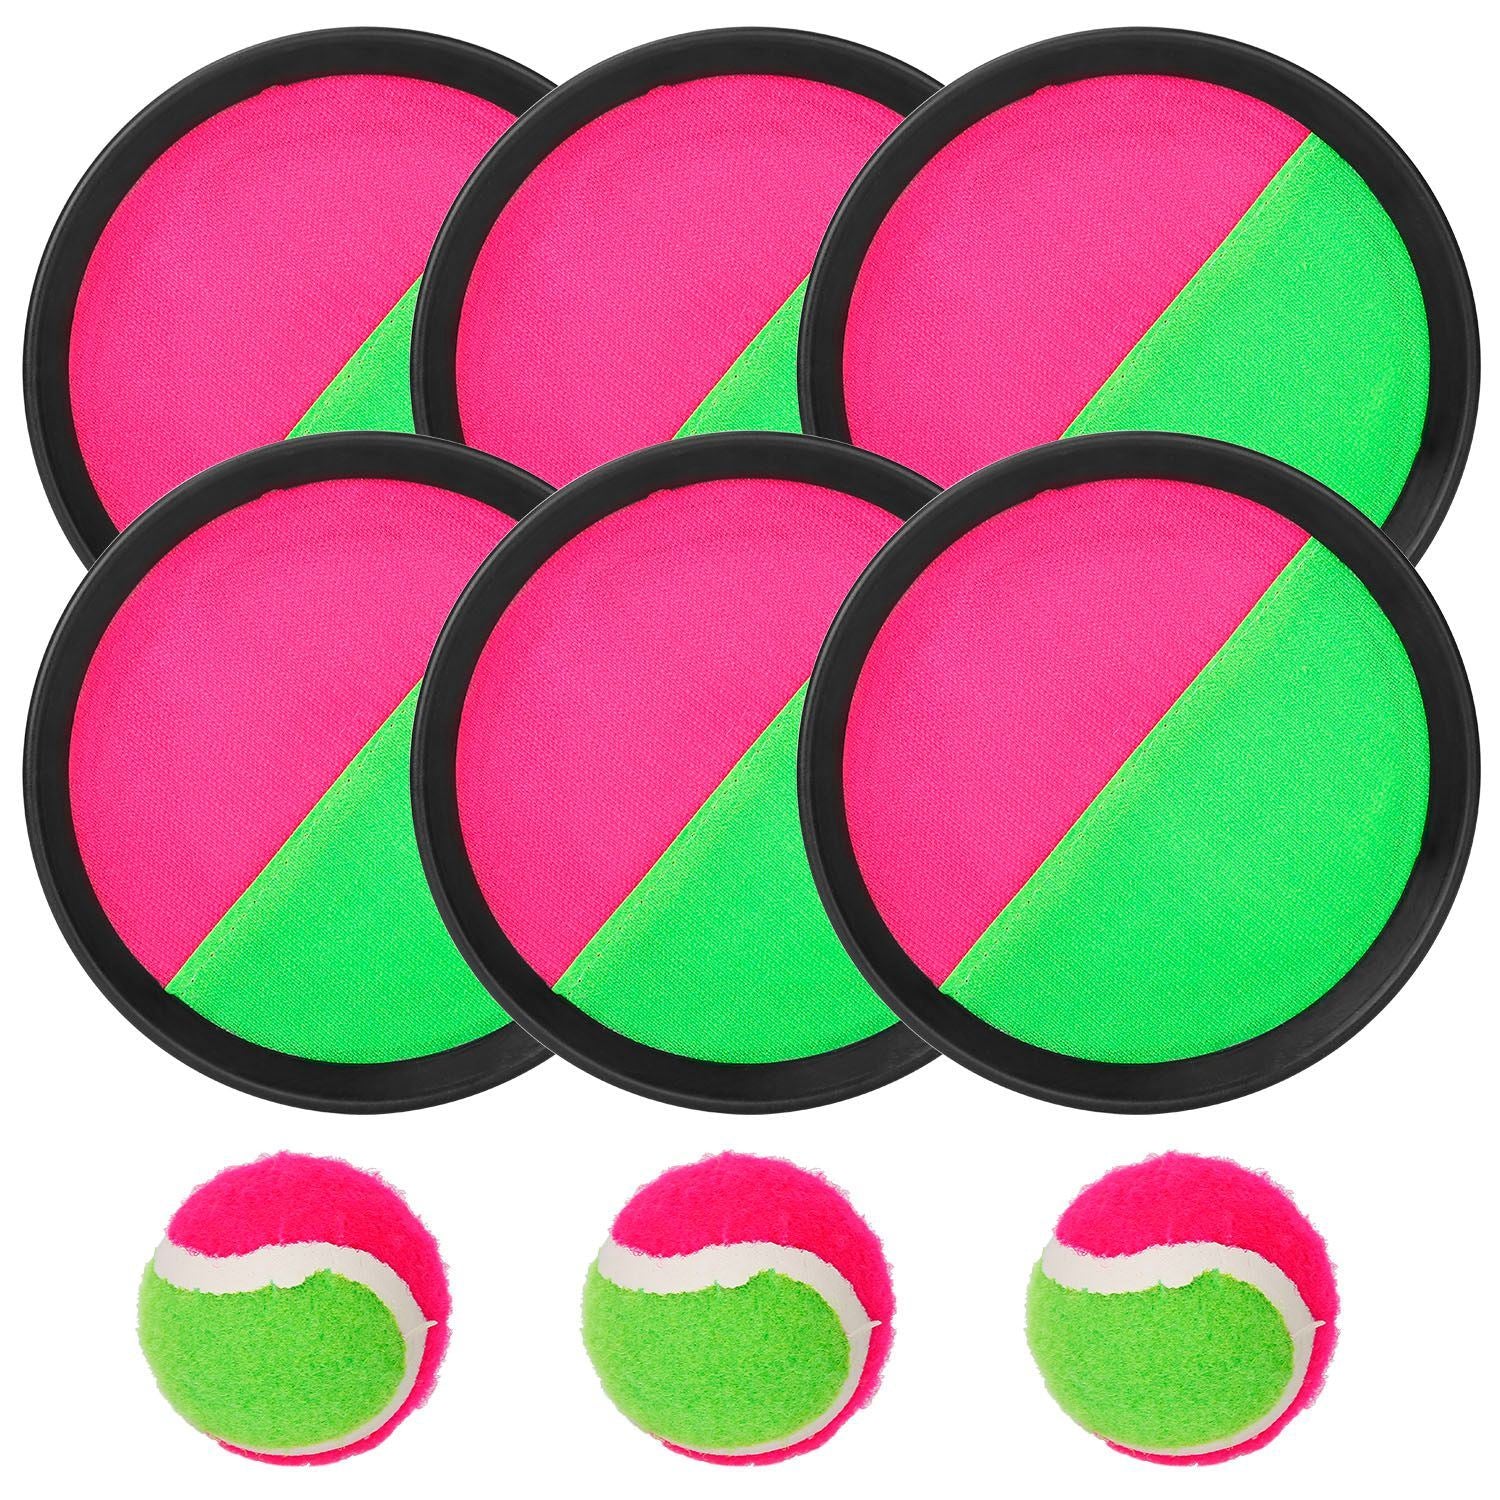 A set of 3Sets Toss and Catch Ball Throw Catch Ball Paddle Outdoor Ball Game Catch Game Beach Games, perfect for a fun backyard game with adjustable paddles.